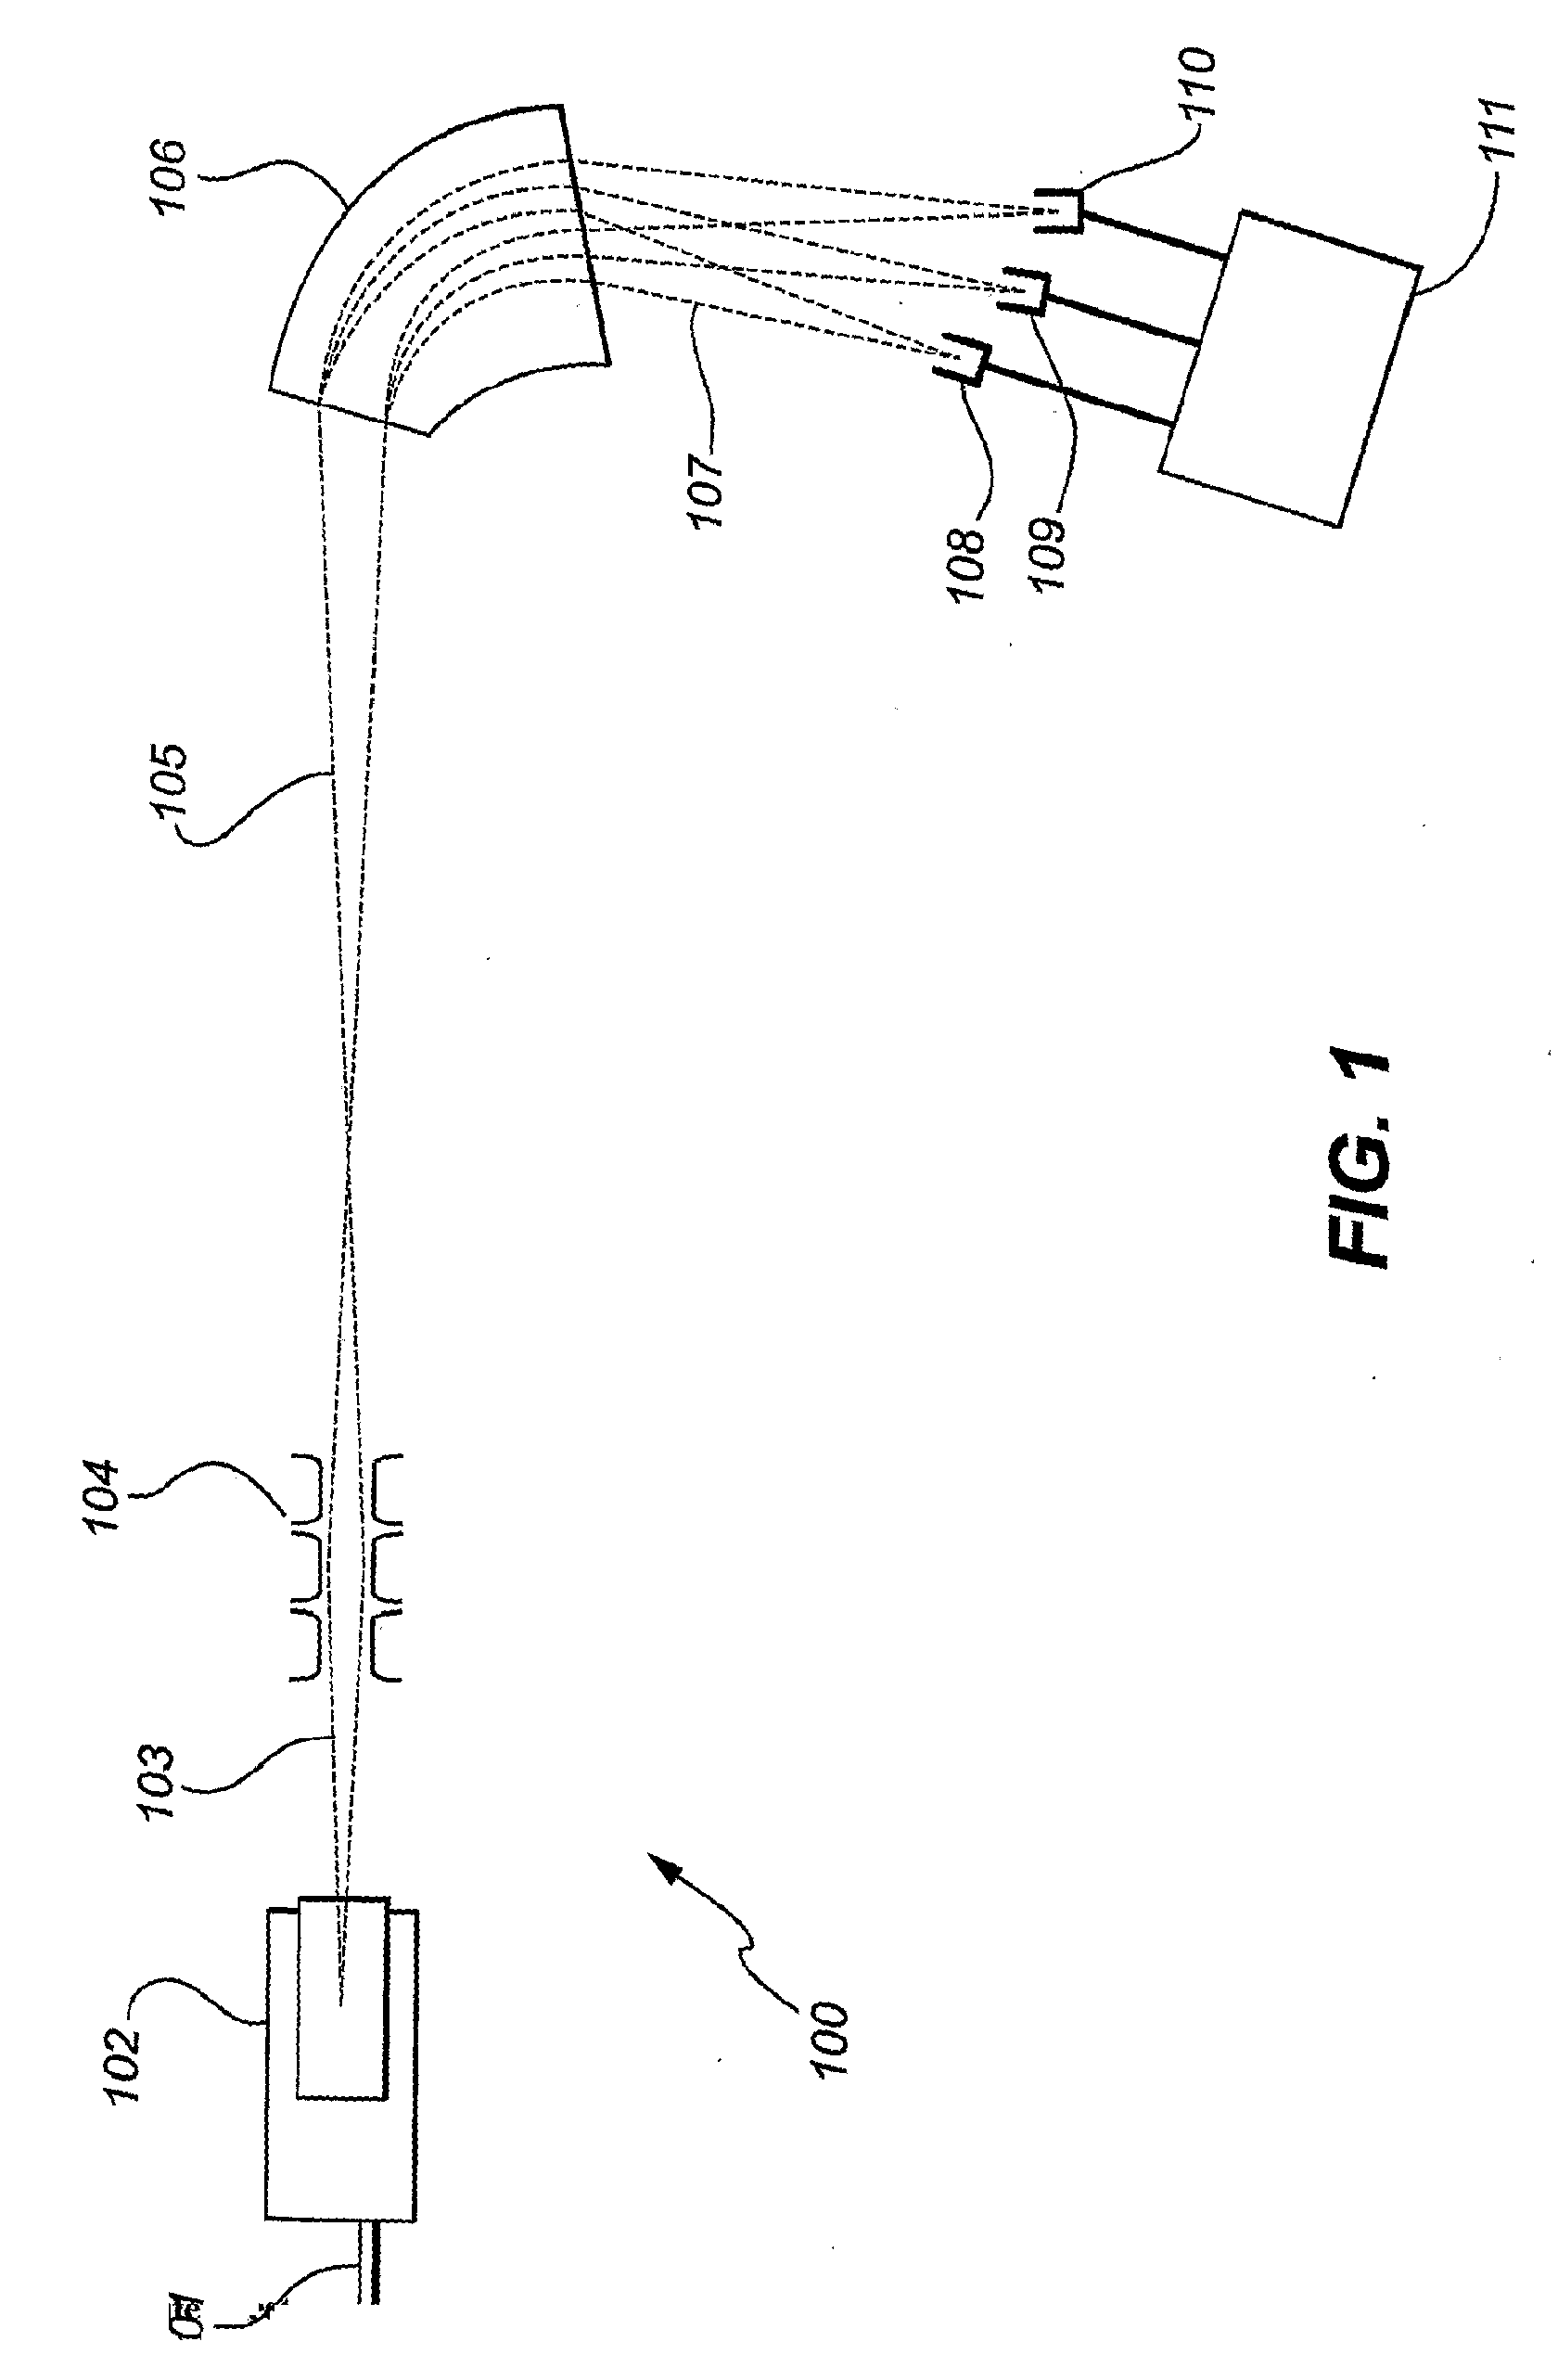 Isotope ratio mass spectrometer and methods for determining isotope ratios